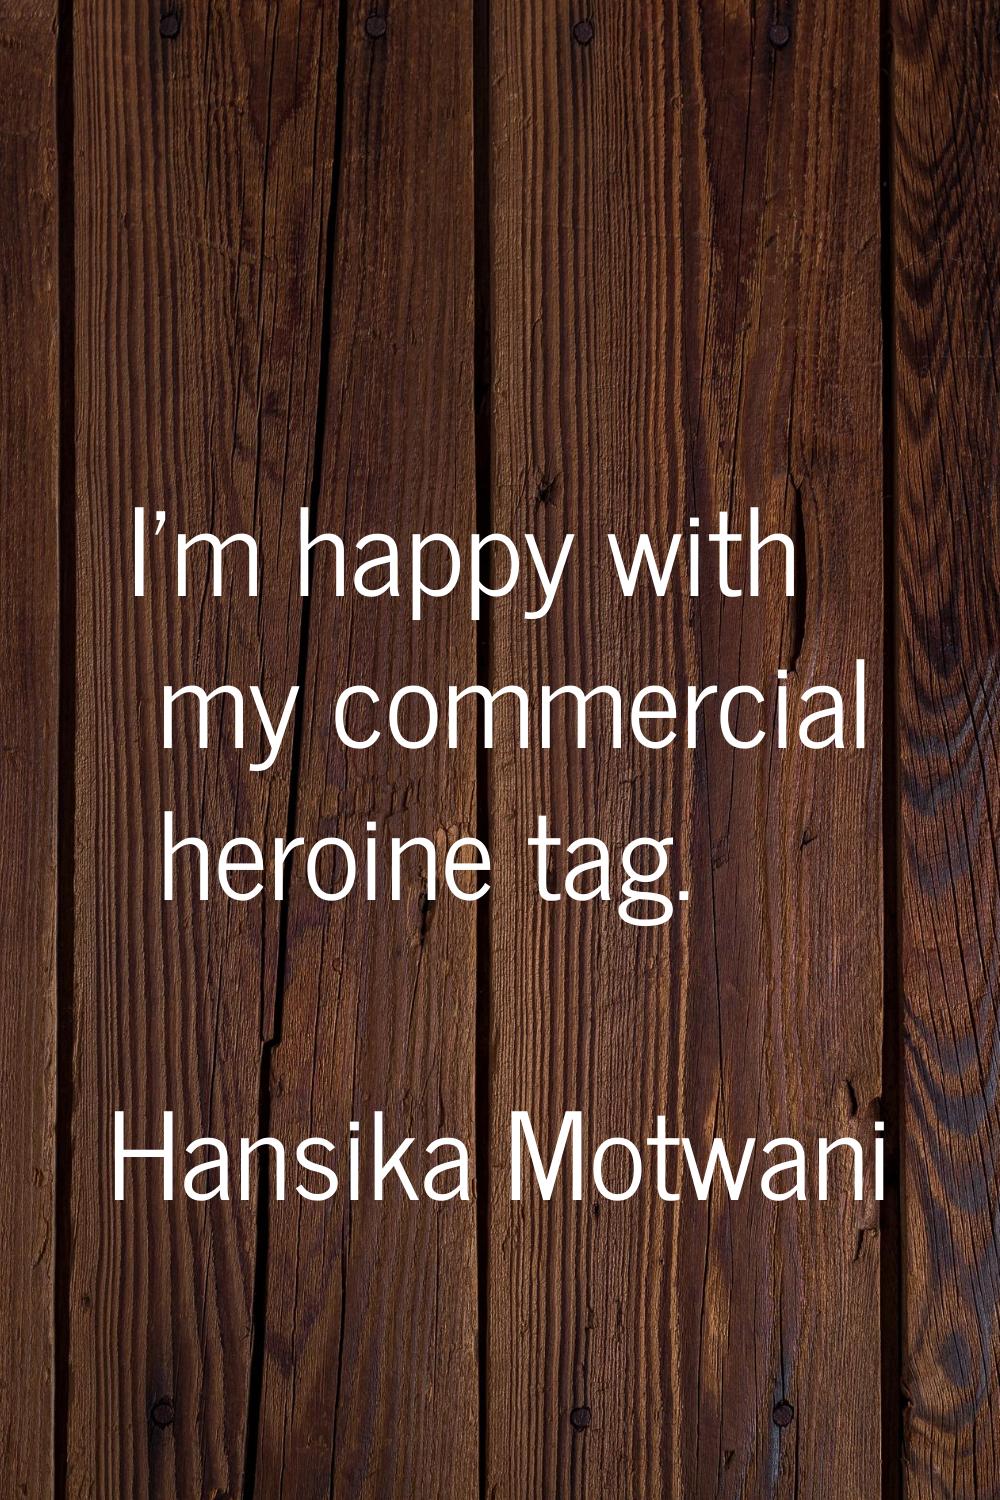 I'm happy with my commercial heroine tag.